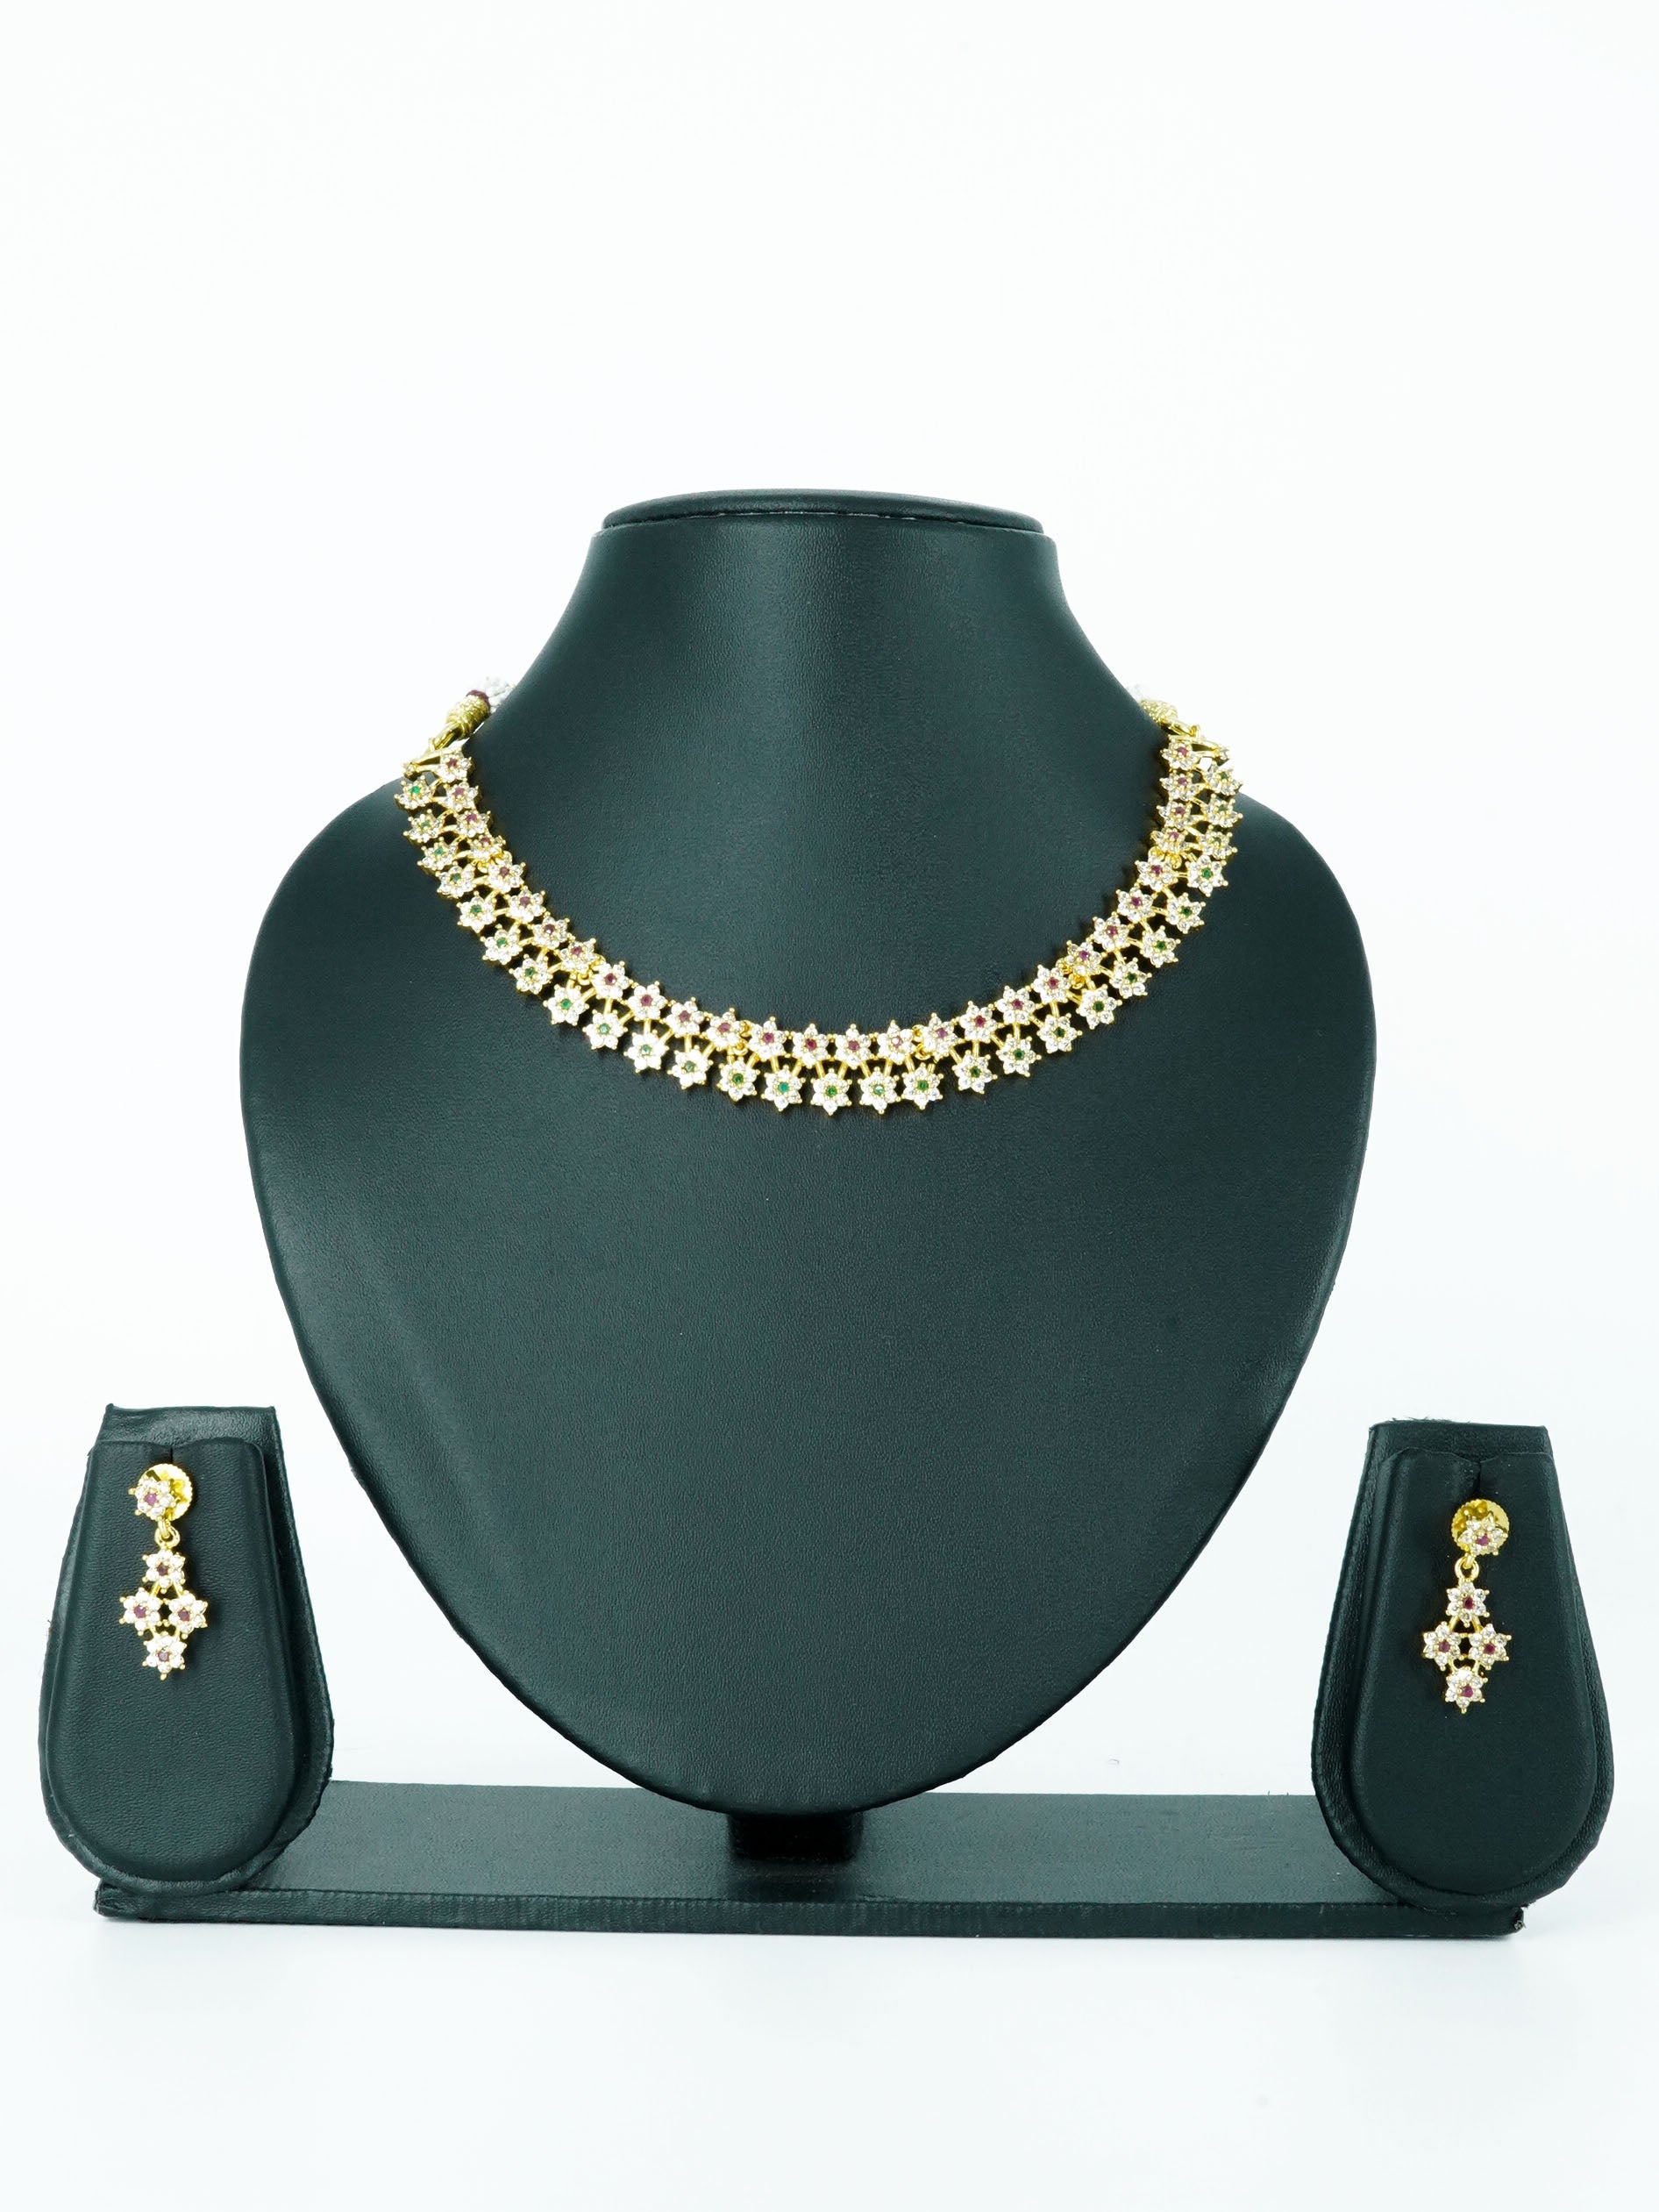 Premium Gold Finish Sayara Collection Bestseller Star Necklace with CZ Stones in diff colours 12798N